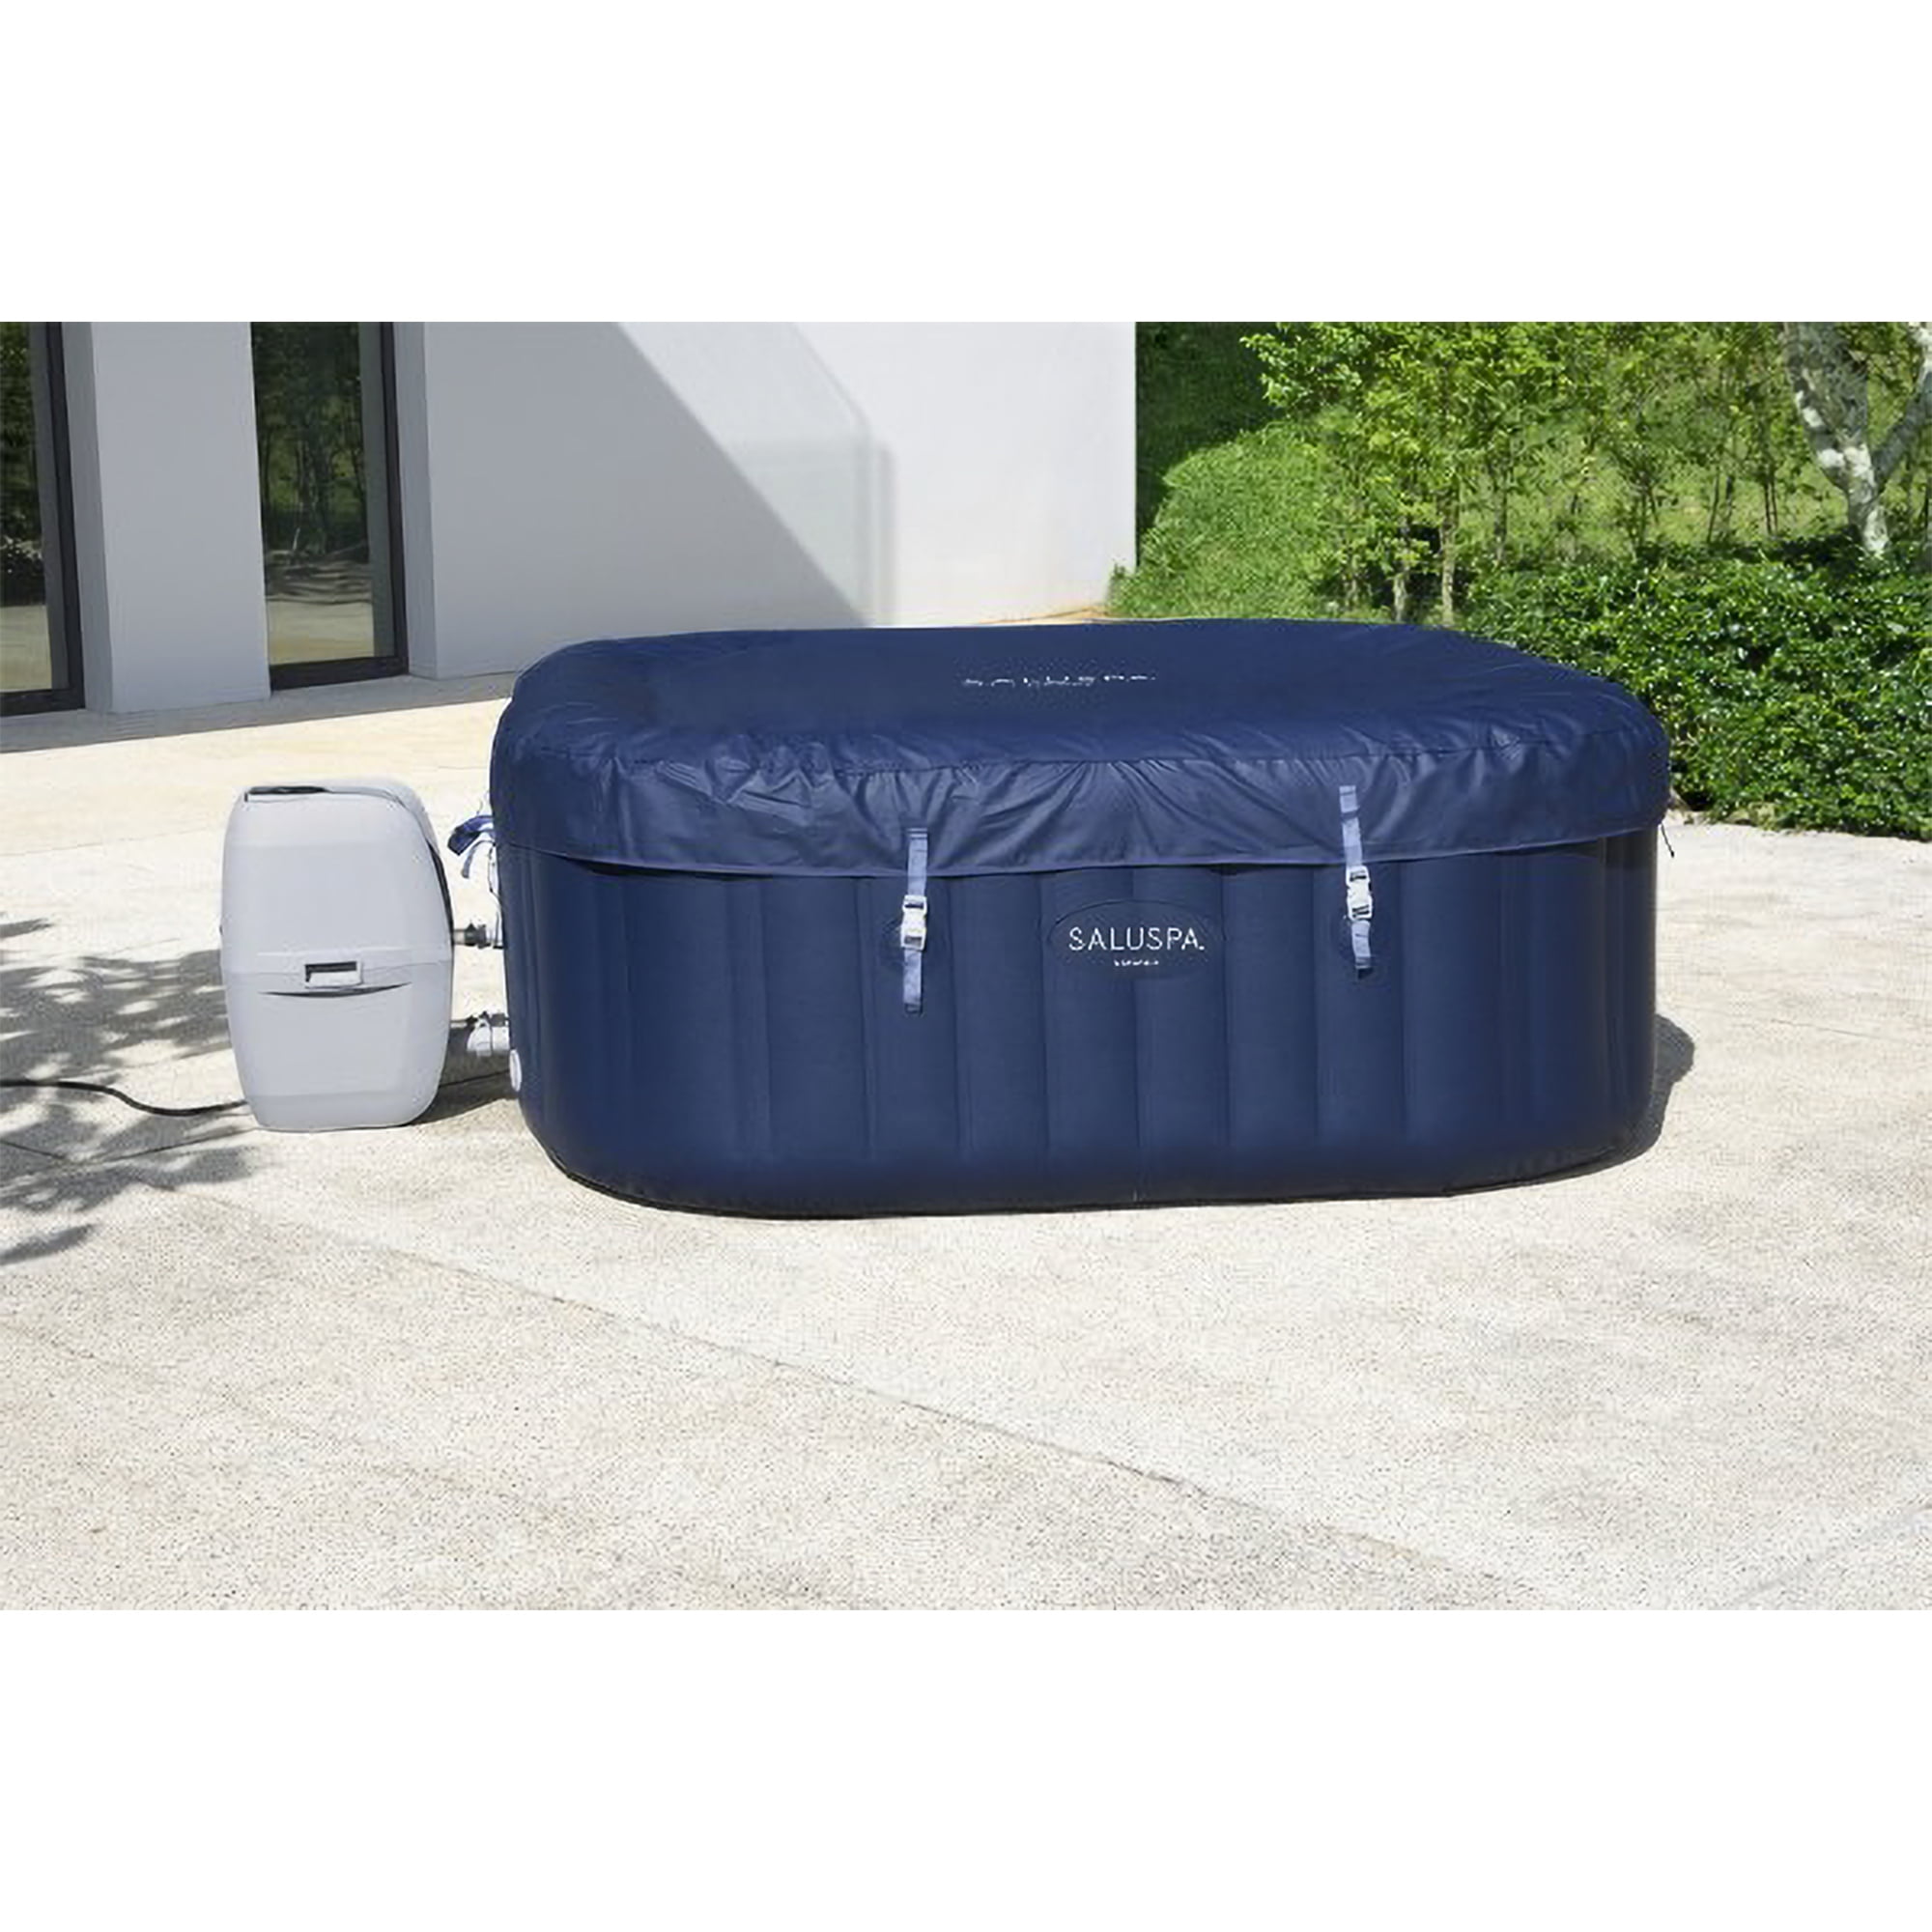 Bestway SaluSpa Hawaii AirJet Inflatable Hot Tub with 114 Jets, Blue